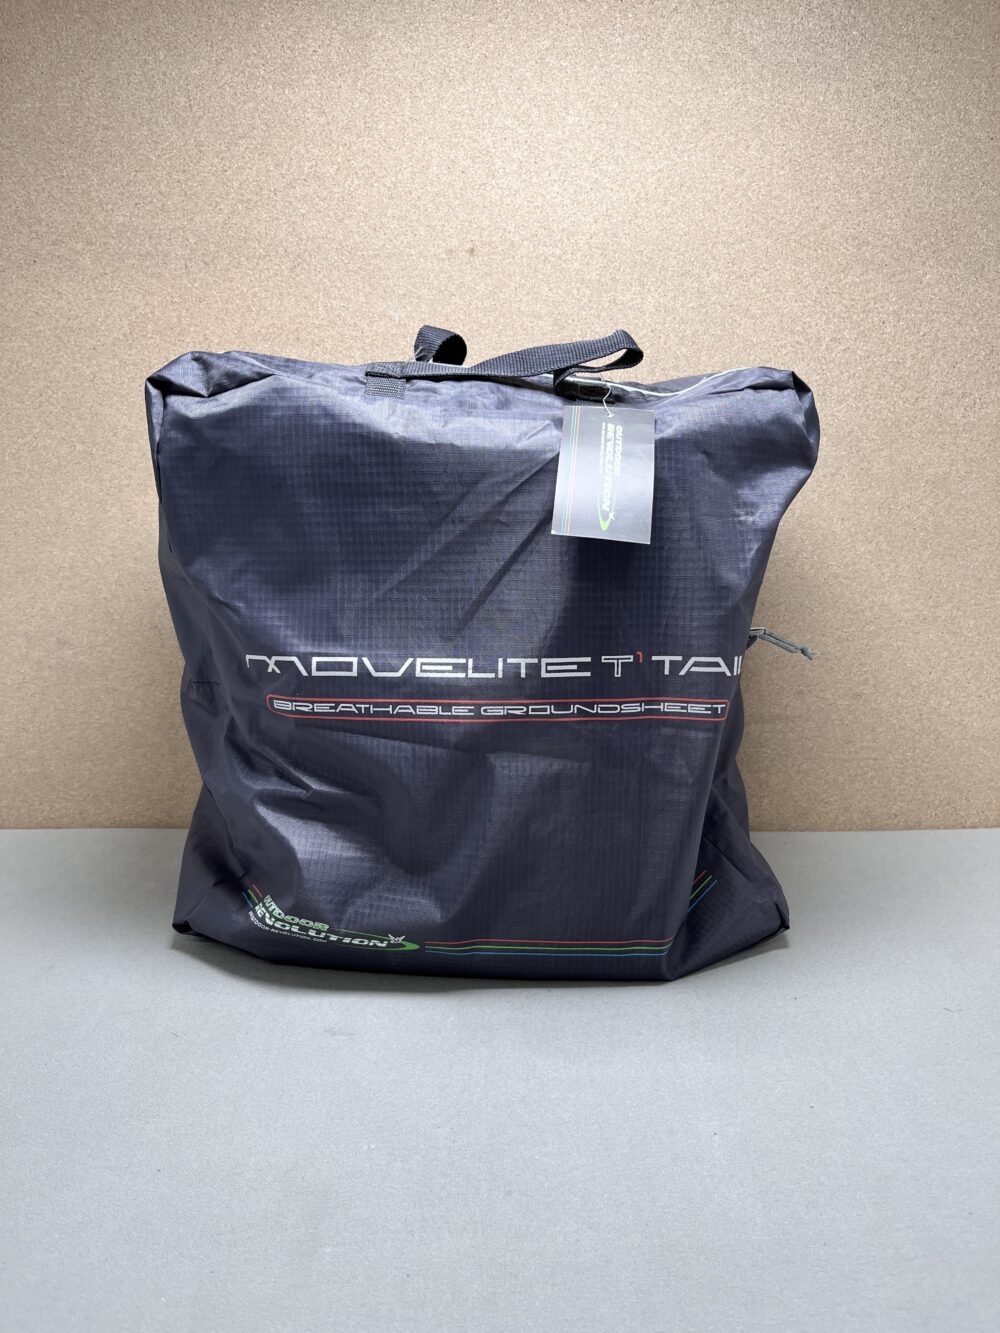 Outdoor Revolution Movelite T1 Tail Breathable Ground Sheet